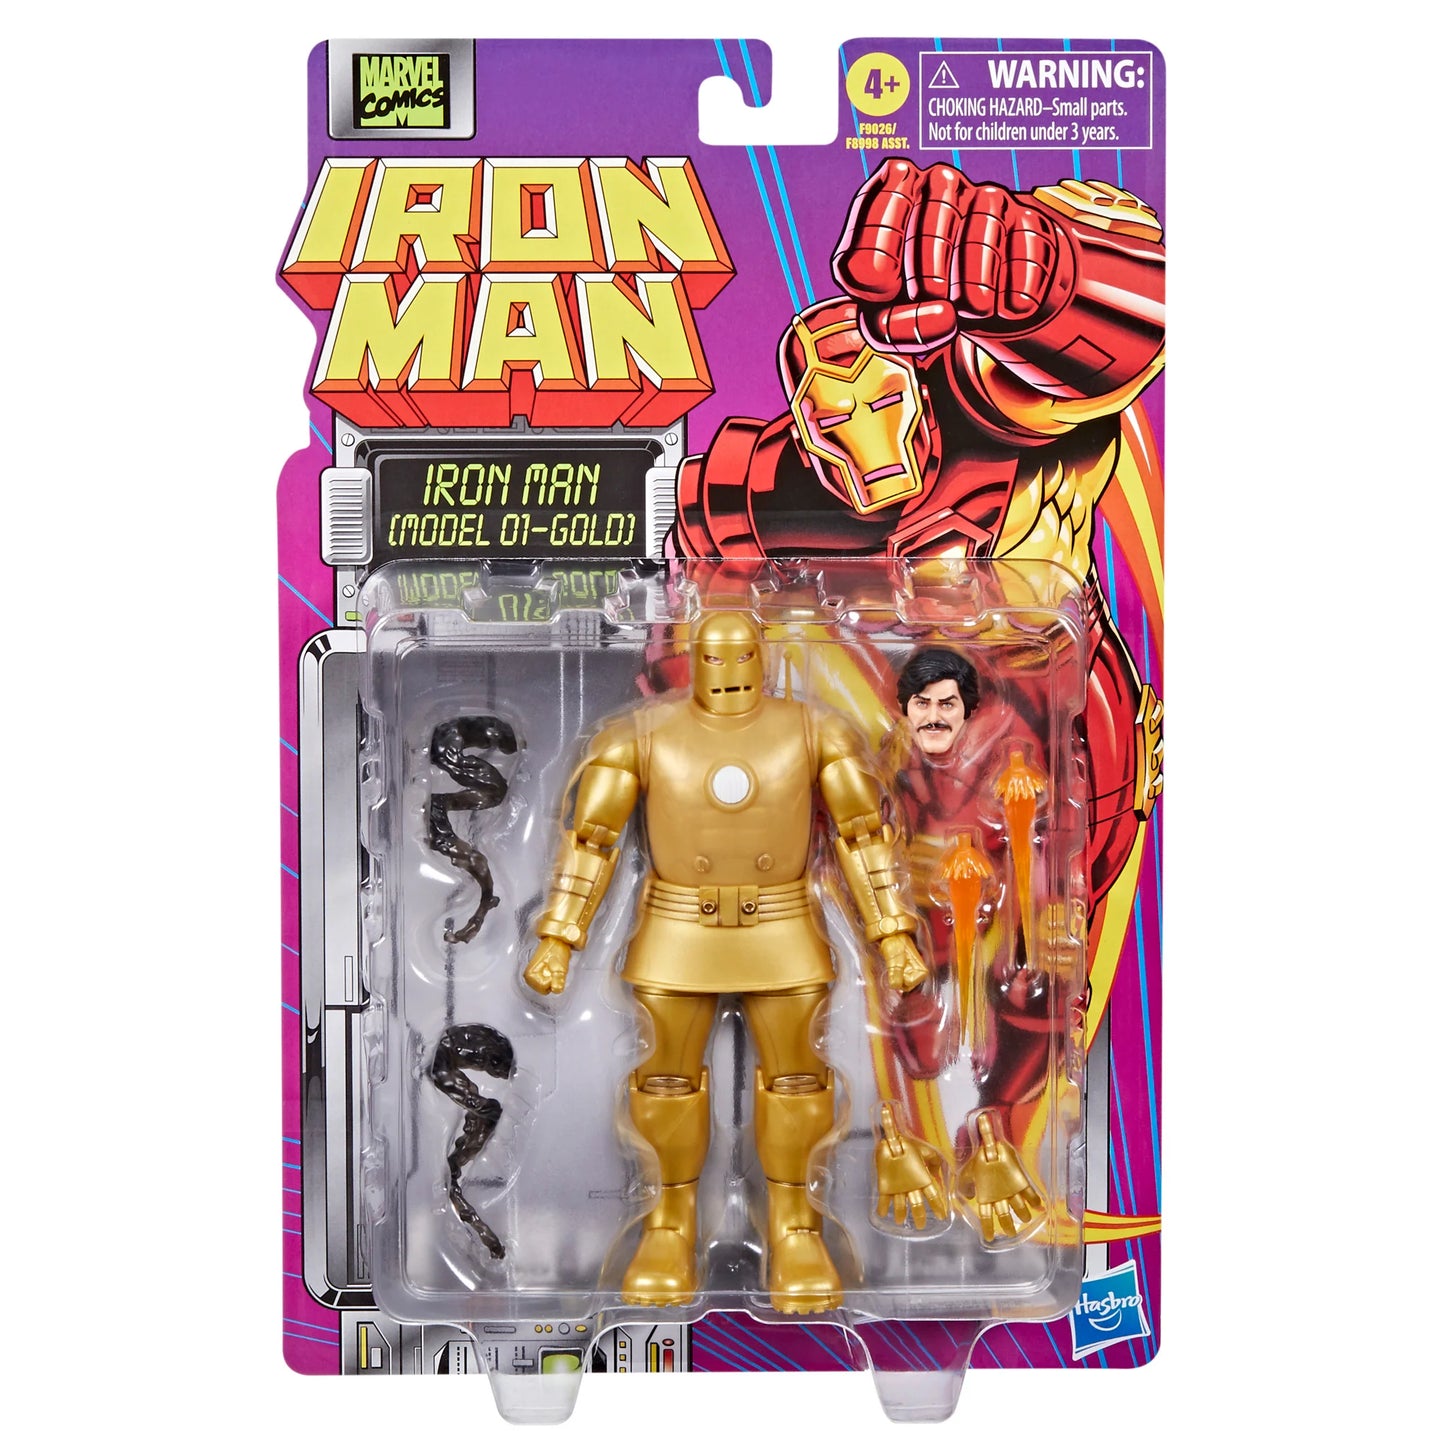 Marvel Legends Series Iron Man (Model 01 - Gold) Action Figure Toy